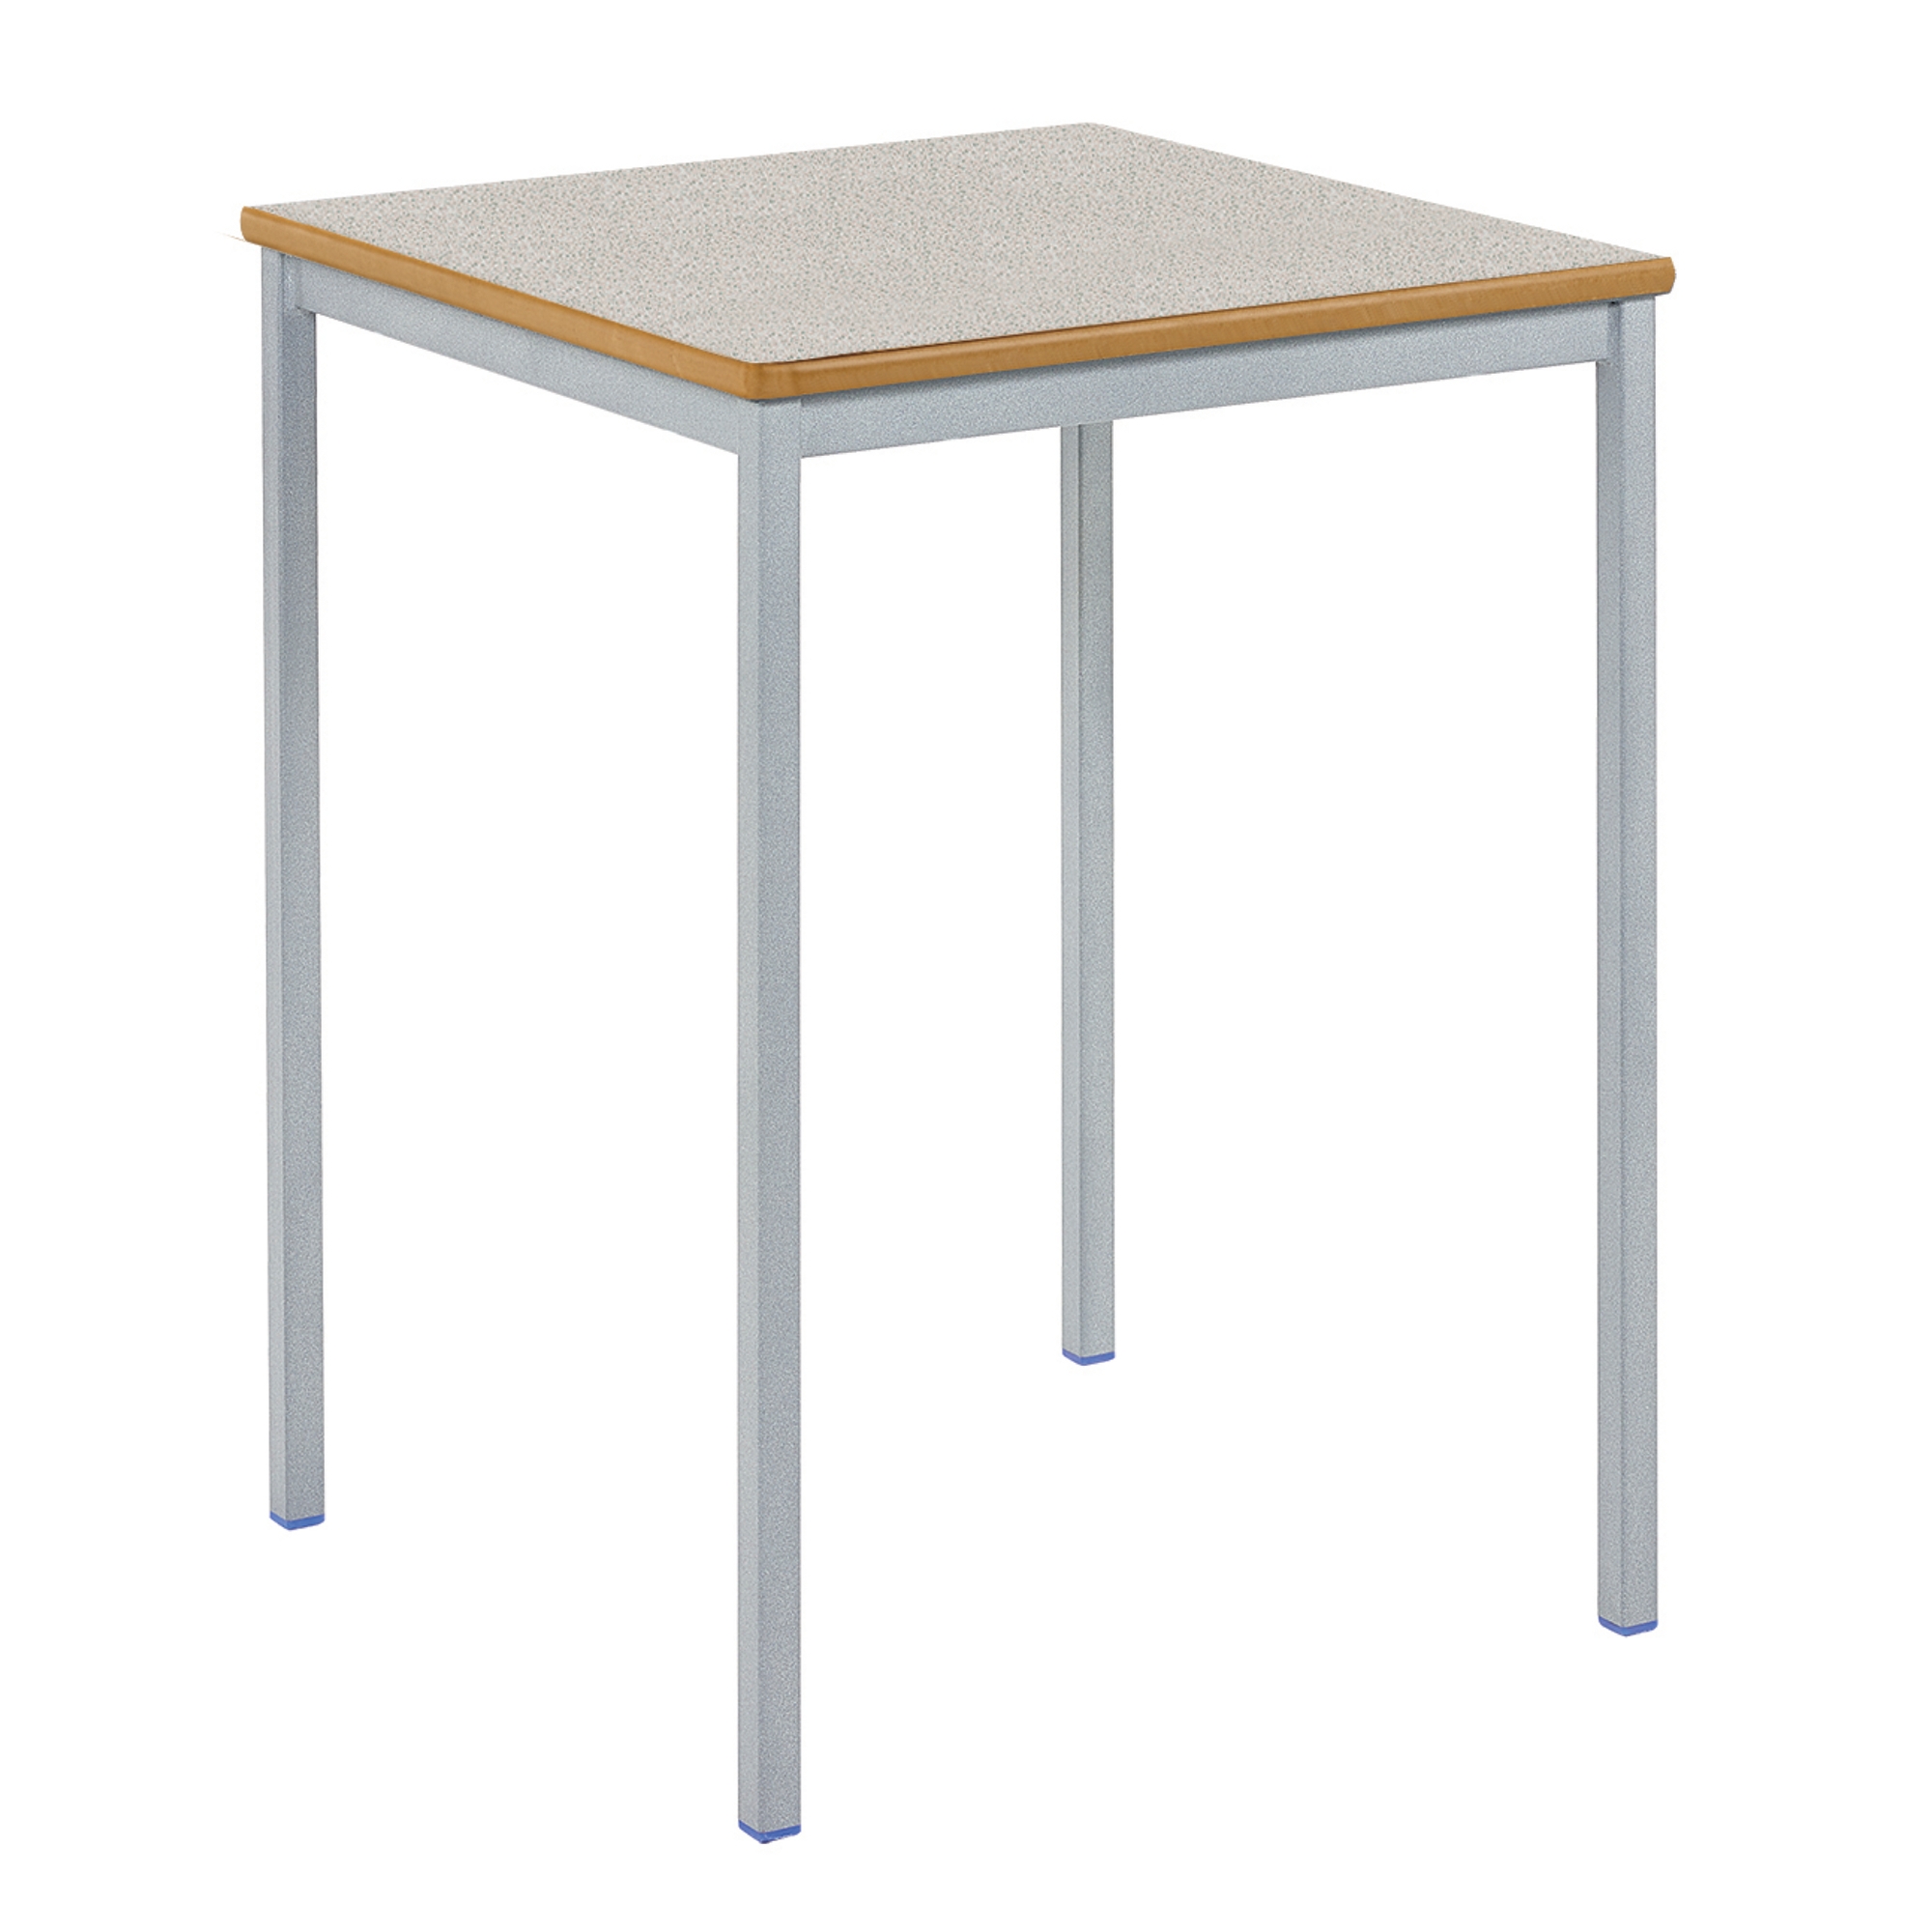 Classmates Square Fully Welded Classroom Table - 600 x 600 x 760mm - Ailsa